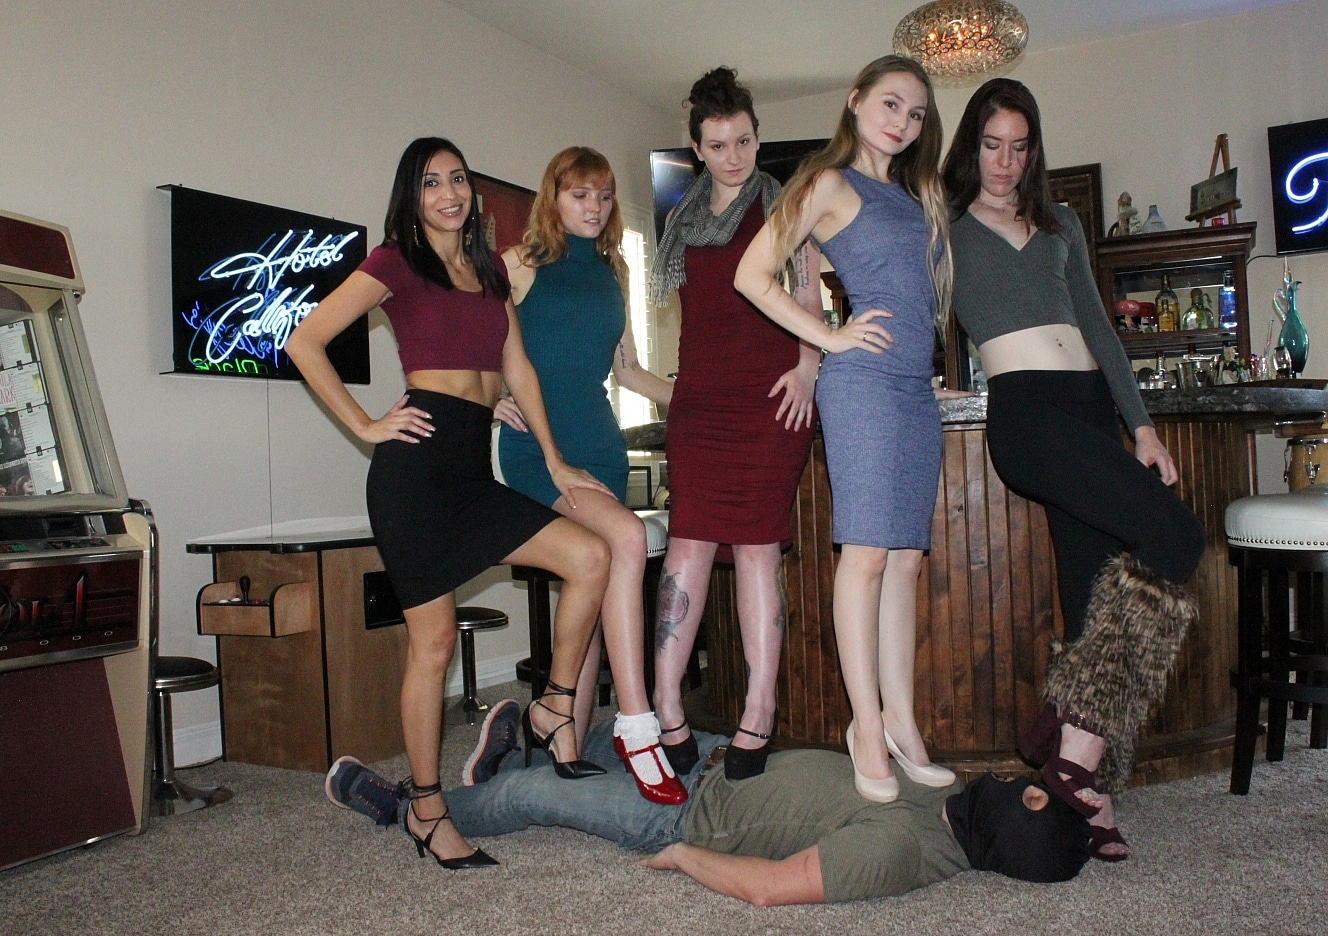 content/the-5-girl-trampling-record/0.jpg